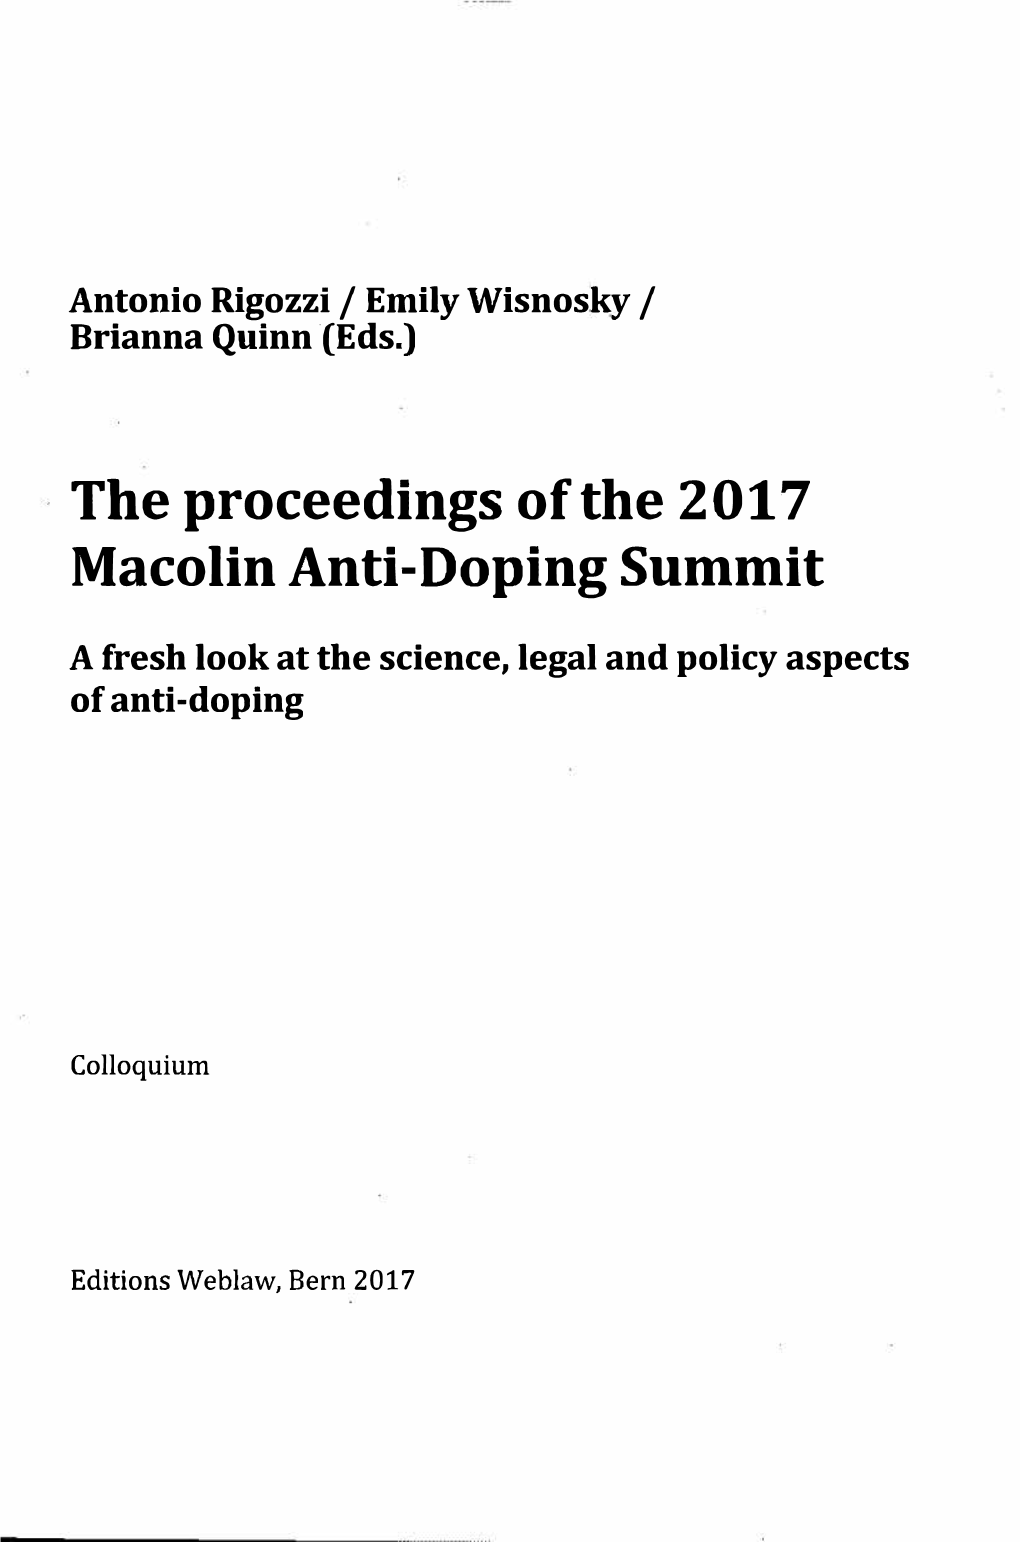 The Proceedings of the 2017 Macolin Anti-Doping Summit